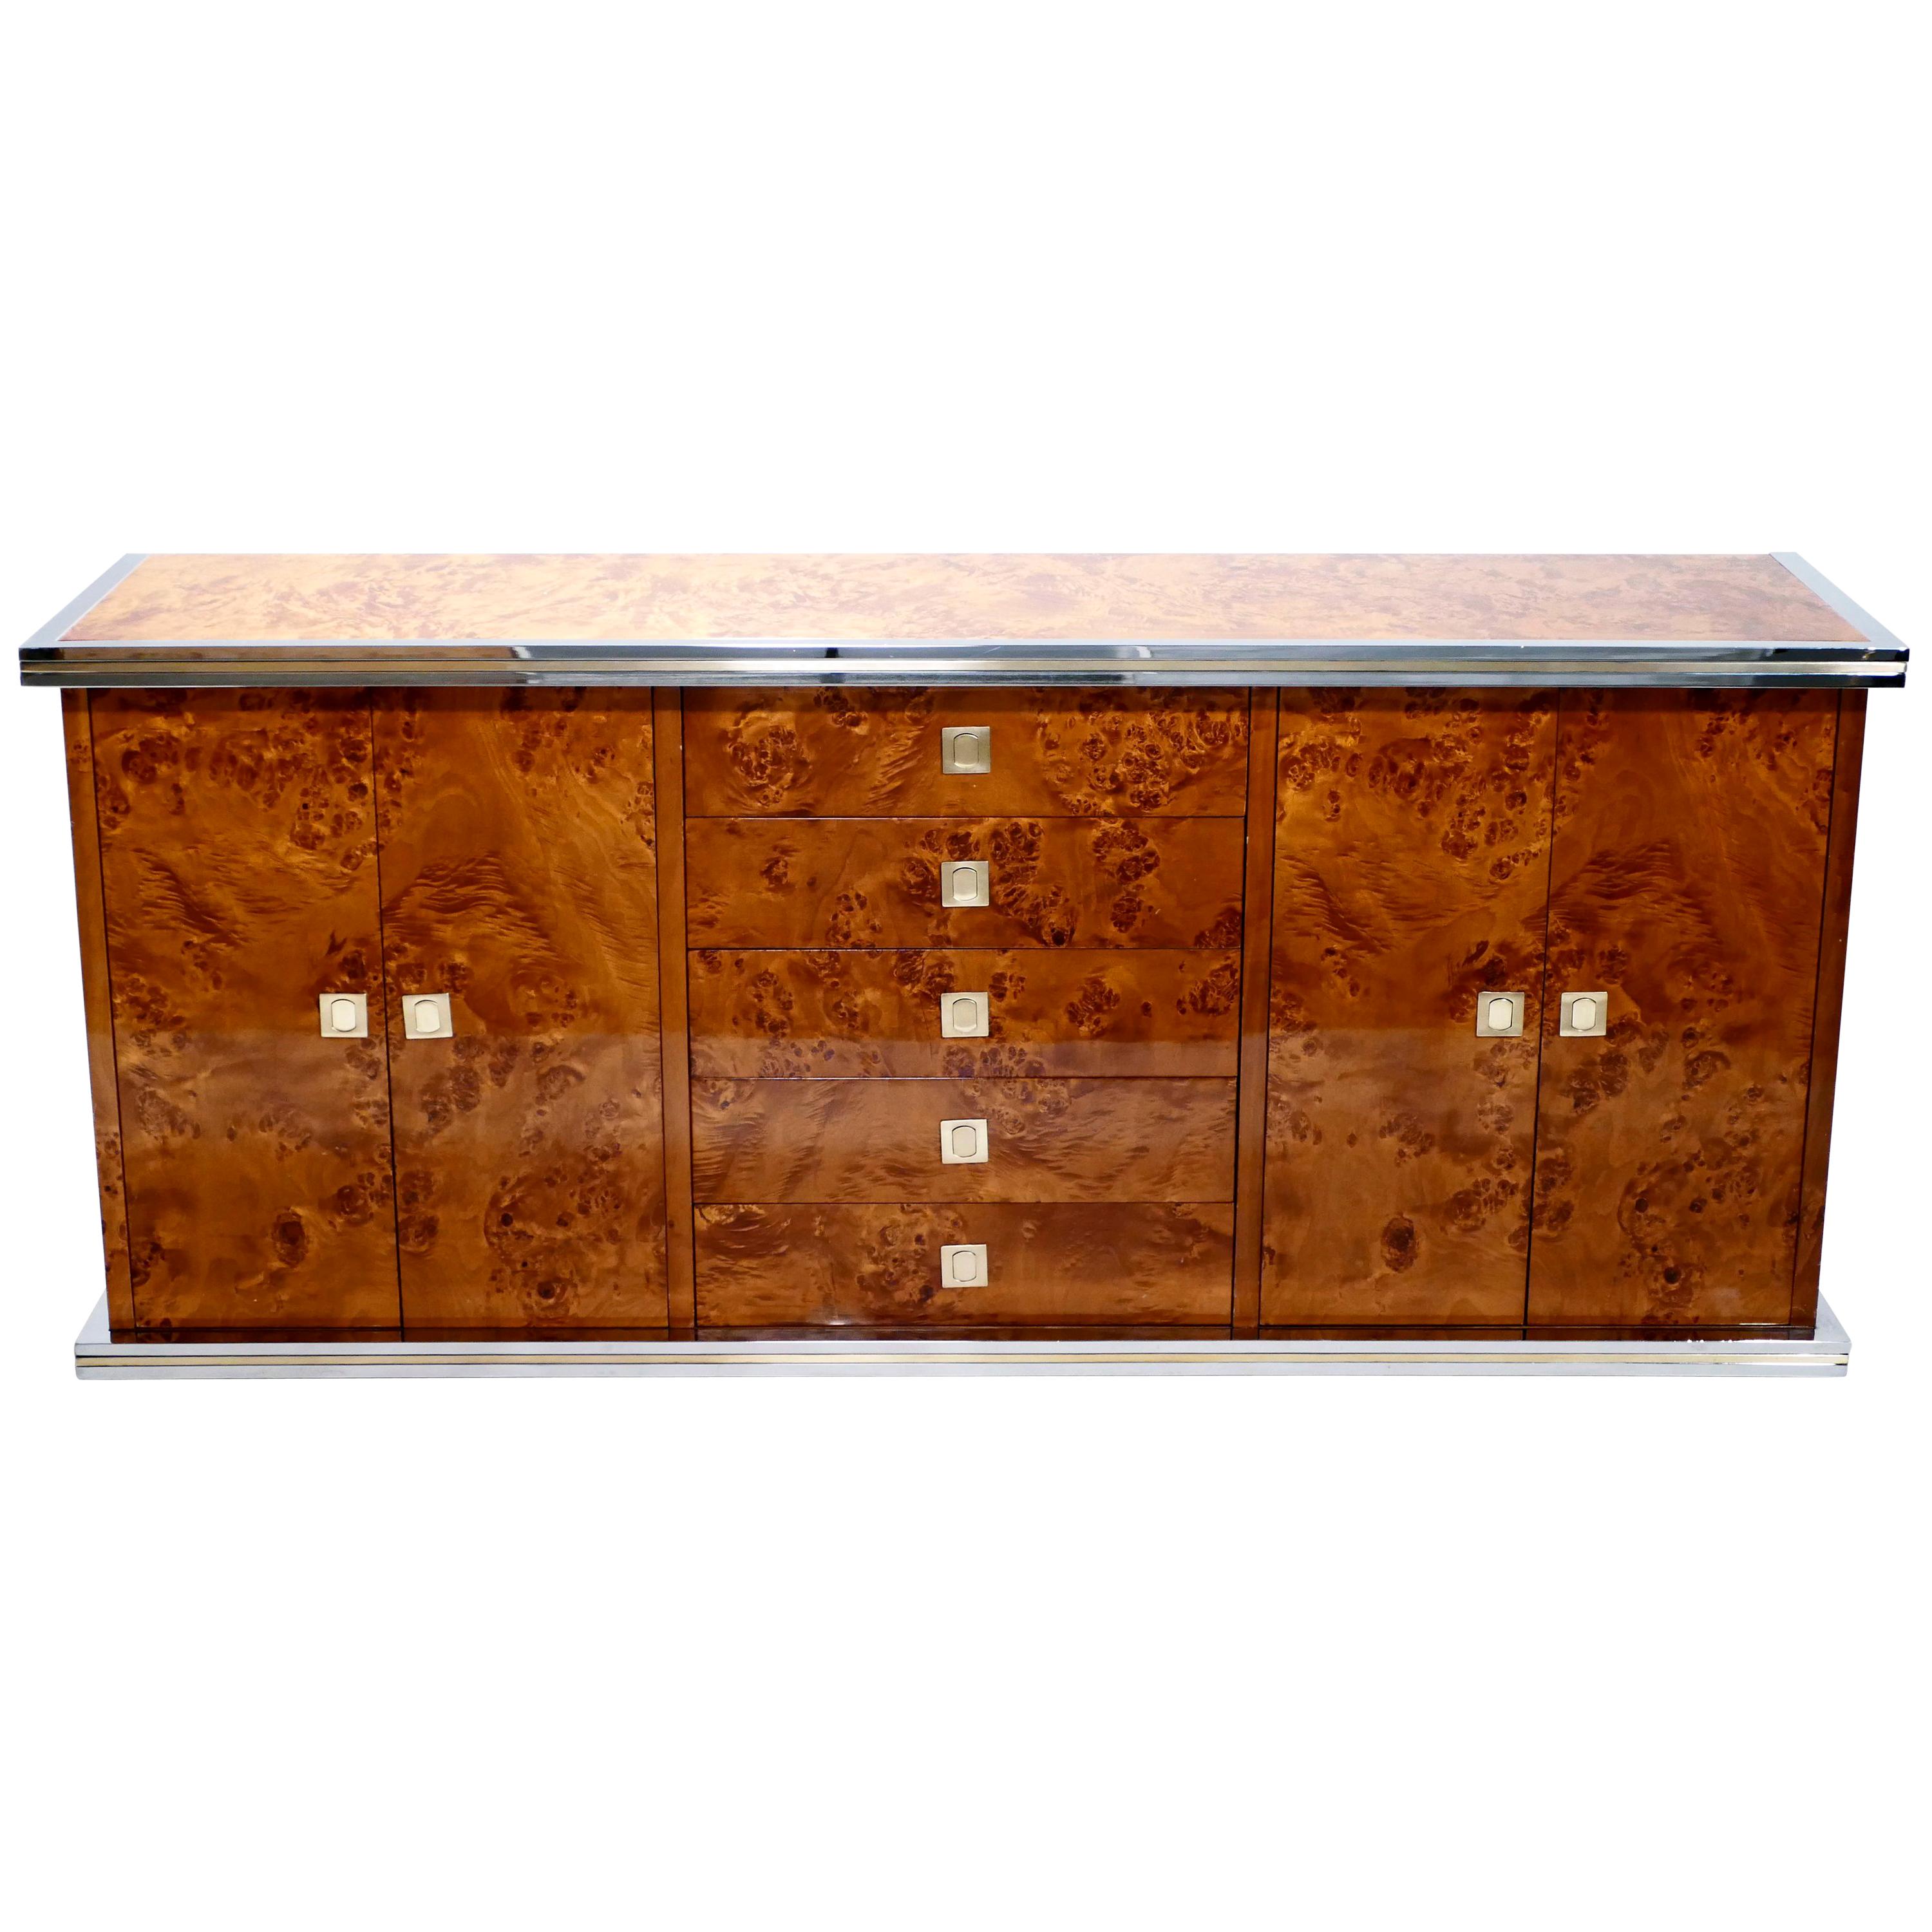 Rich burl wood is the eye-catching chief material in this beautiful, rare credenza by Willy Rizzo. The wood sides and top swirl and ripple into shades of caramel and coffee brown, for a warm, glossy look. Brass and chrome accents, along the clean